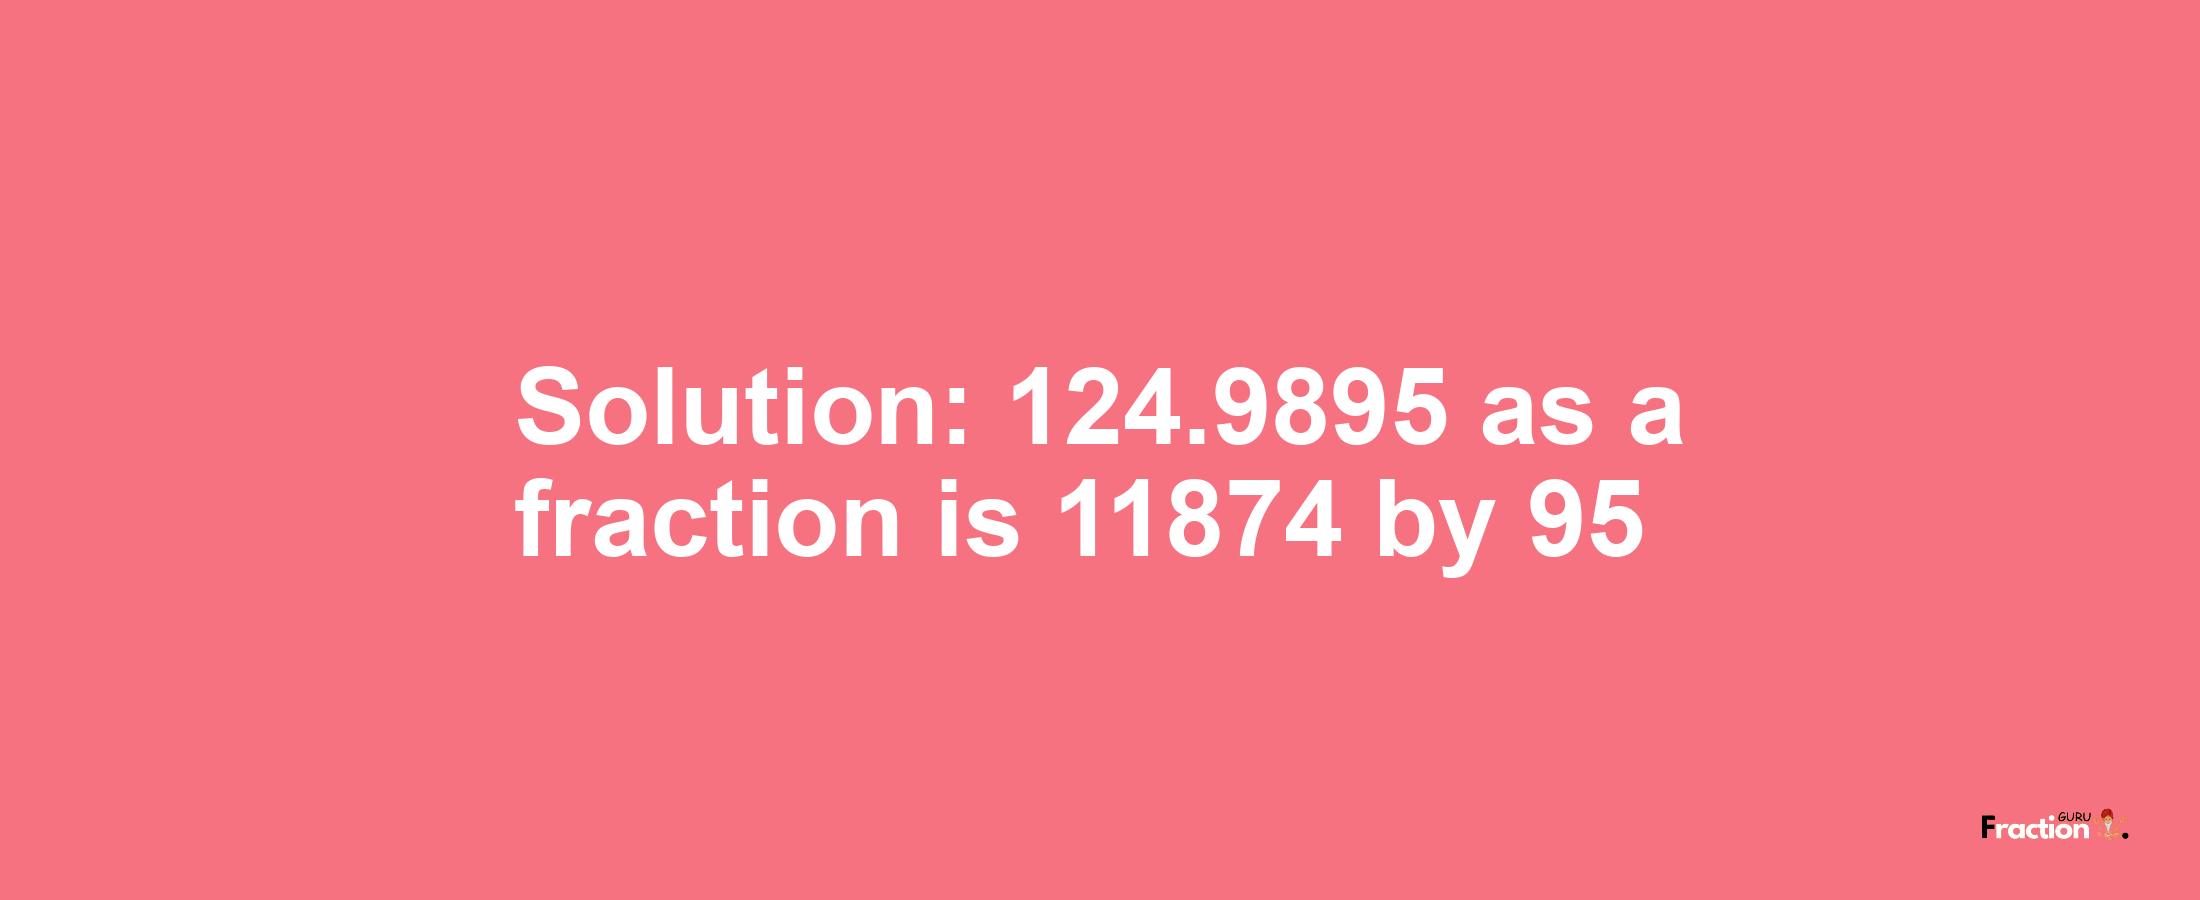 Solution:124.9895 as a fraction is 11874/95